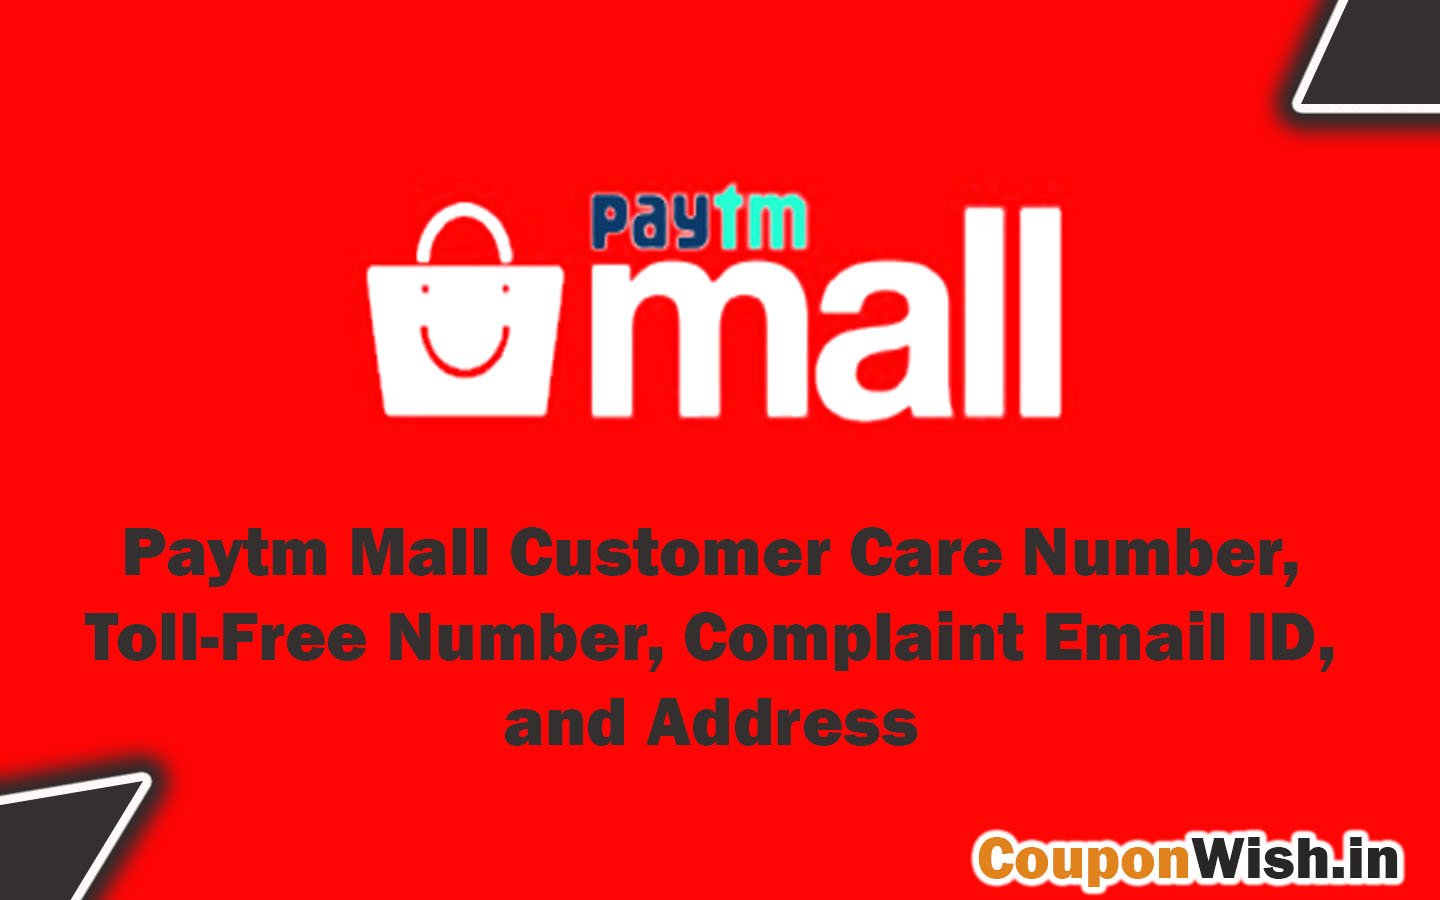 Paytm Mall Customer Care Number, Toll-Free Number, Complaint Email ID, and Address